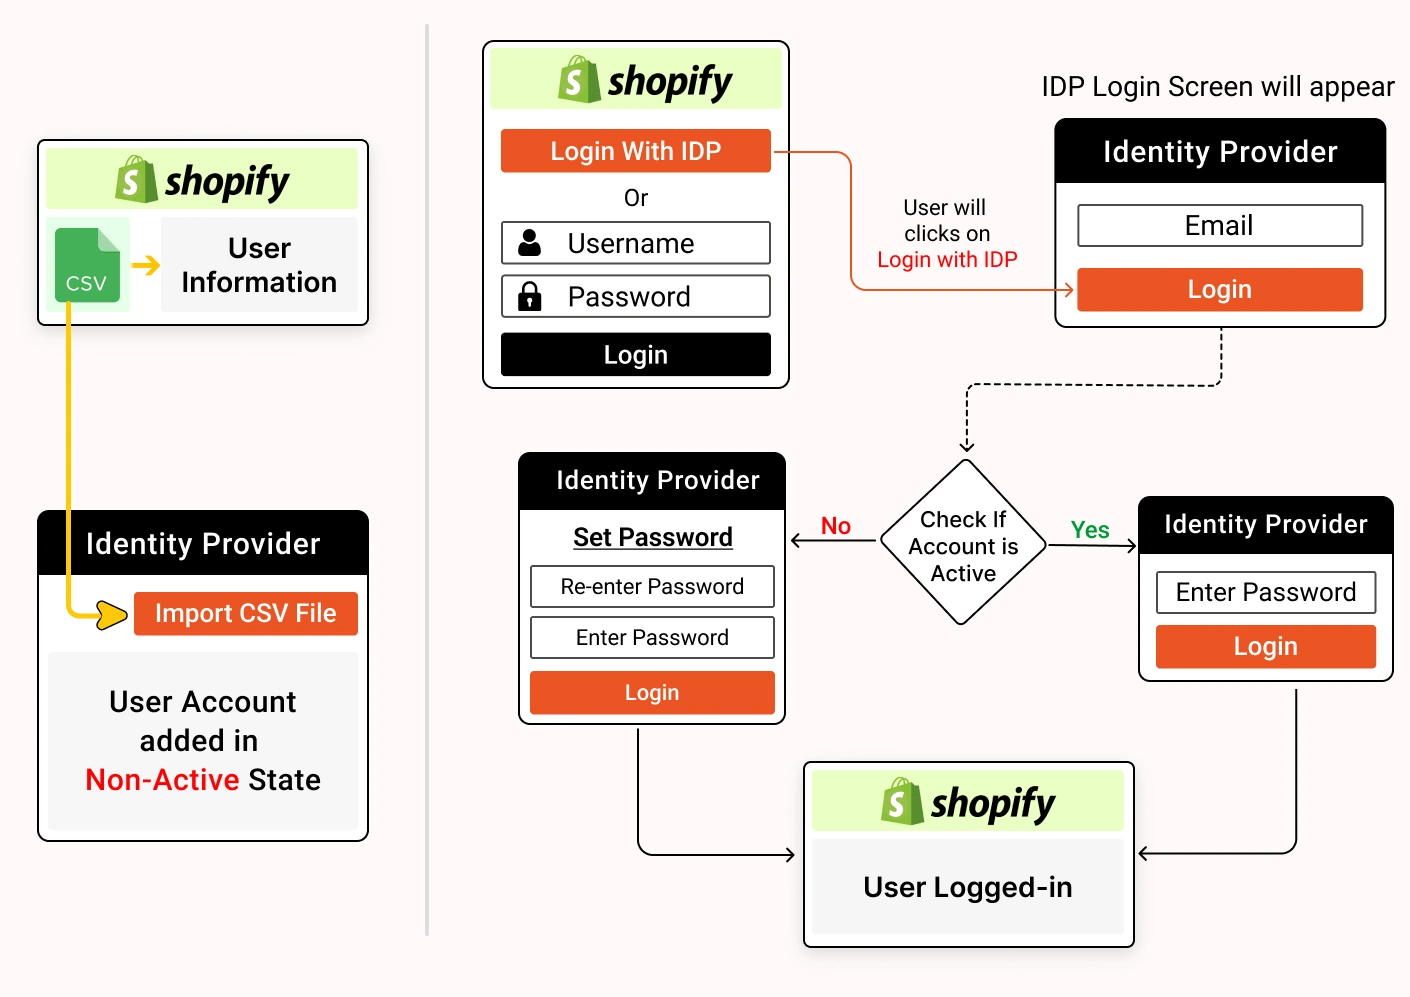 Migrate Users from Shopify - bulk migration